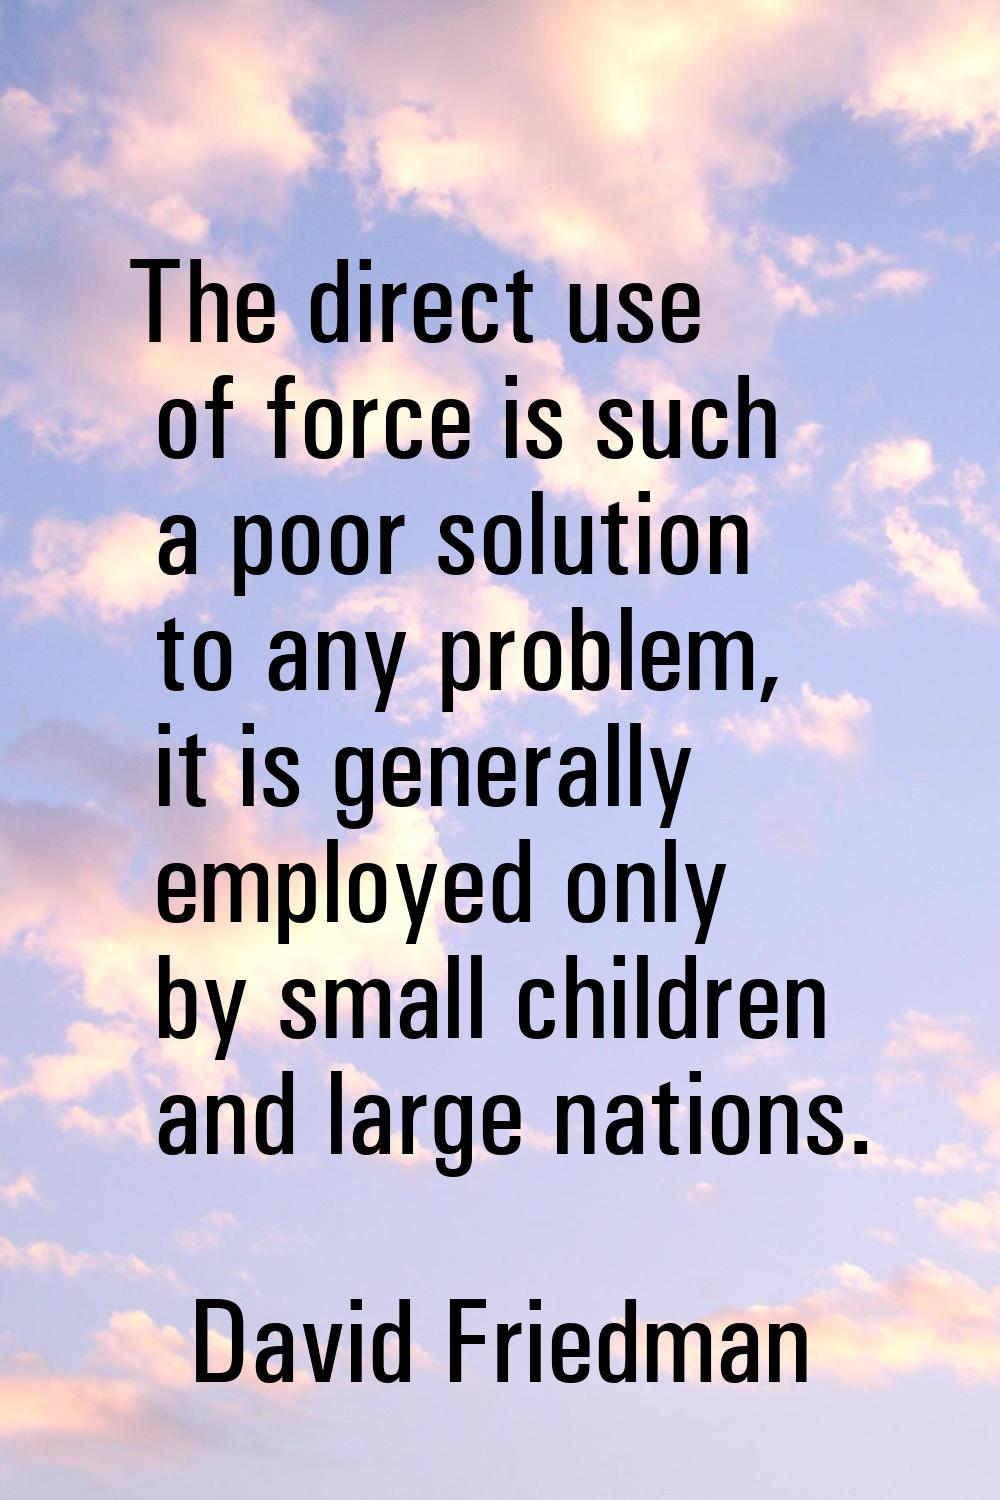 The direct use of force is such a poor solution to any problem, it is generally employed only by sm